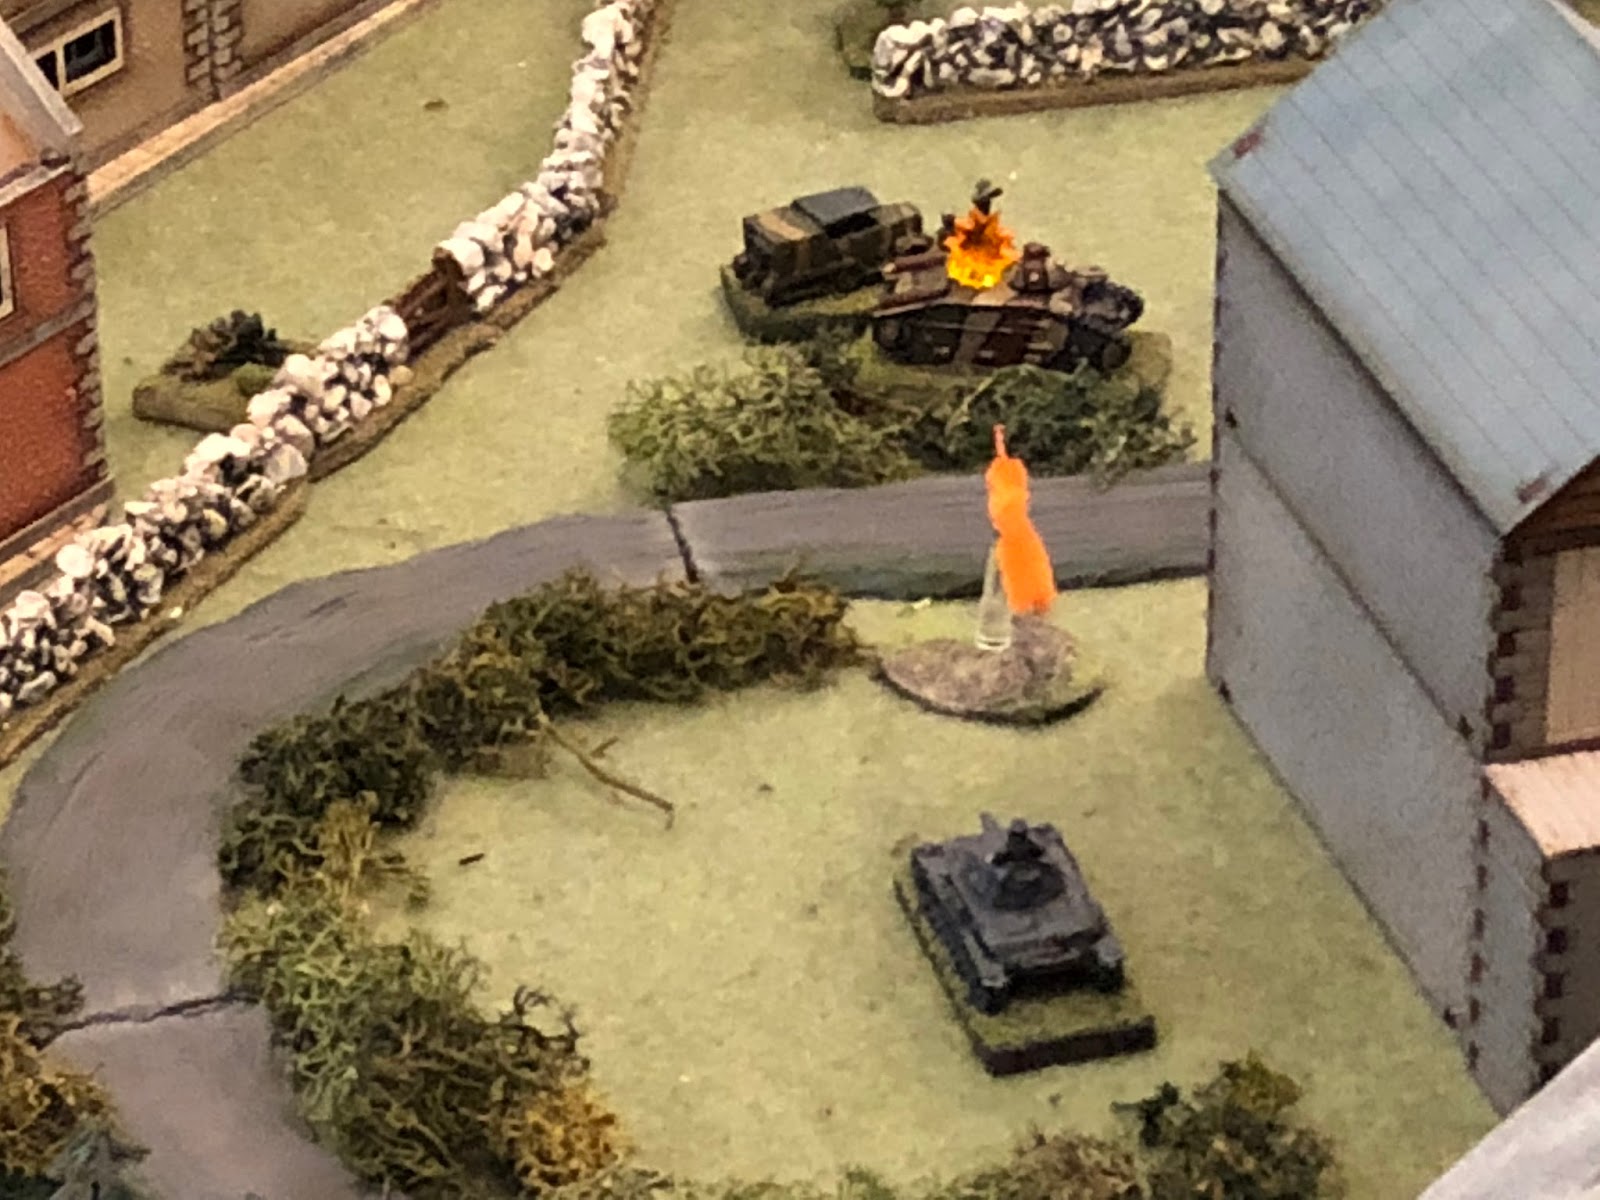  And just as the enemy ATG gets into position (top left), SSgt Mangold's tank fires at the flank of the Char B... 